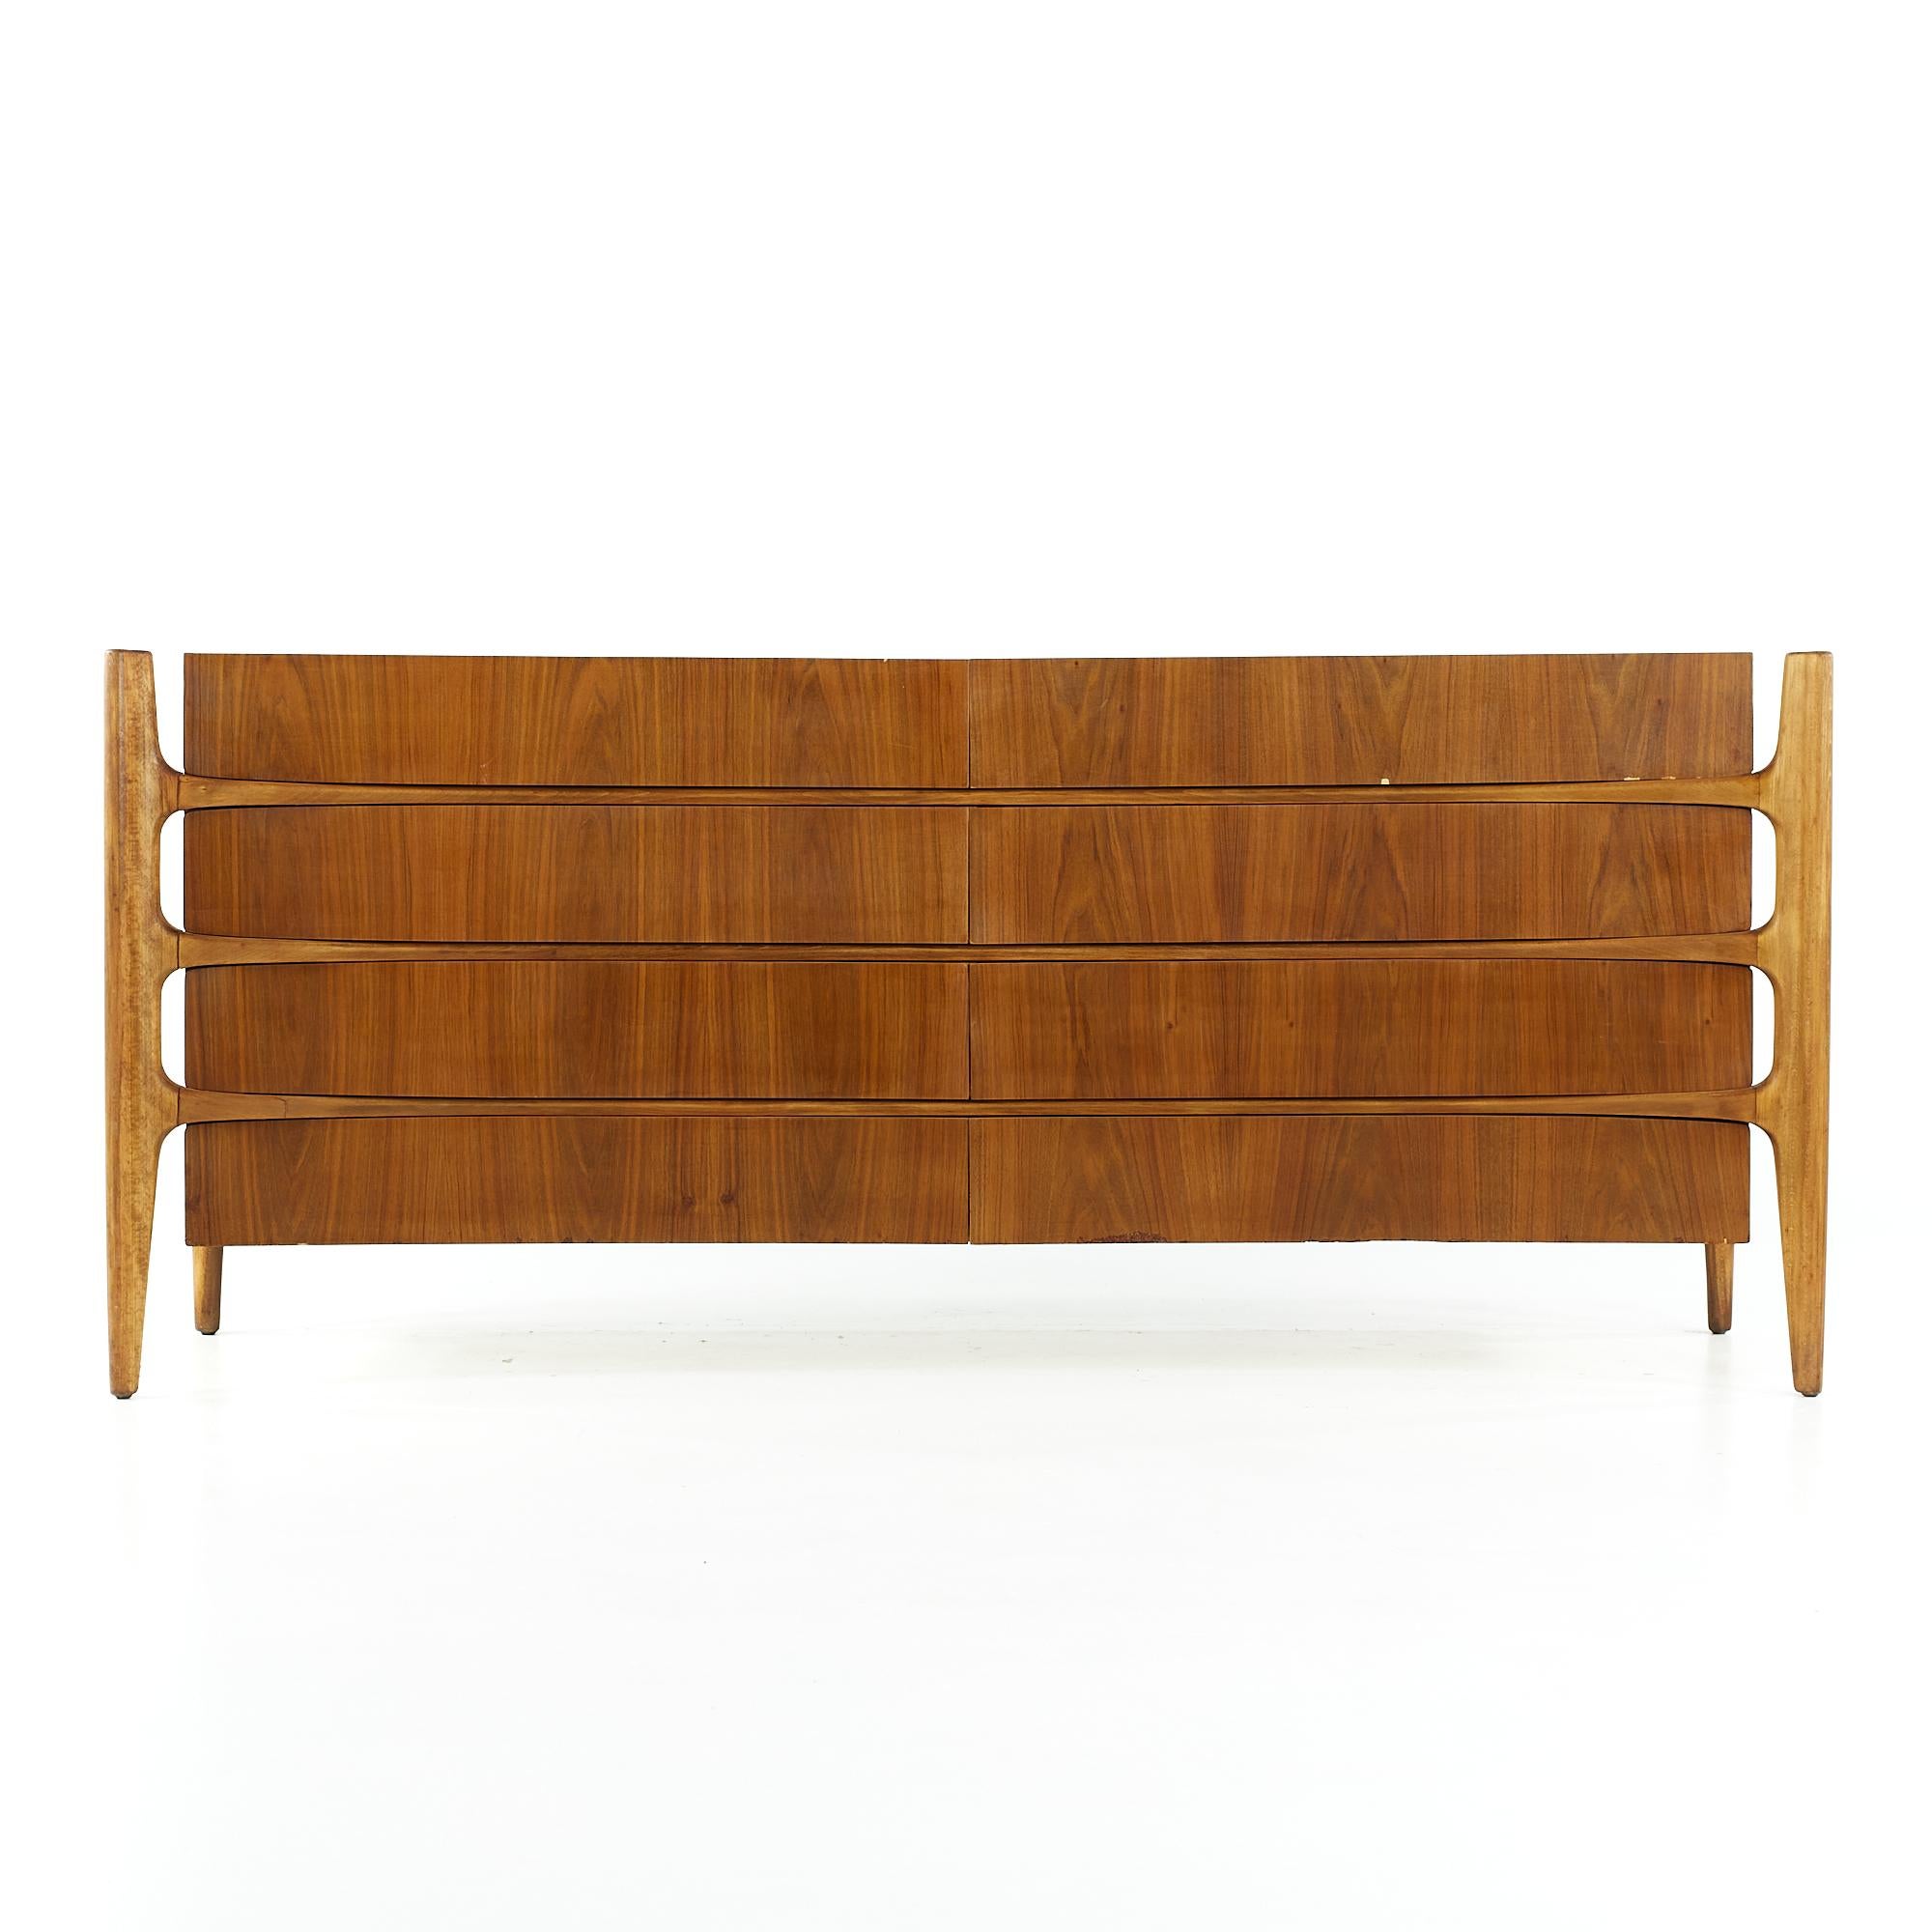 William Hinn midcentury walnut curved front lowboy dresser

This lowboy measures: 78.5 wide x 24 deep x 34 inches high

All pieces of furniture can be had in what we call restored vintage condition. That means the piece is restored upon purchase